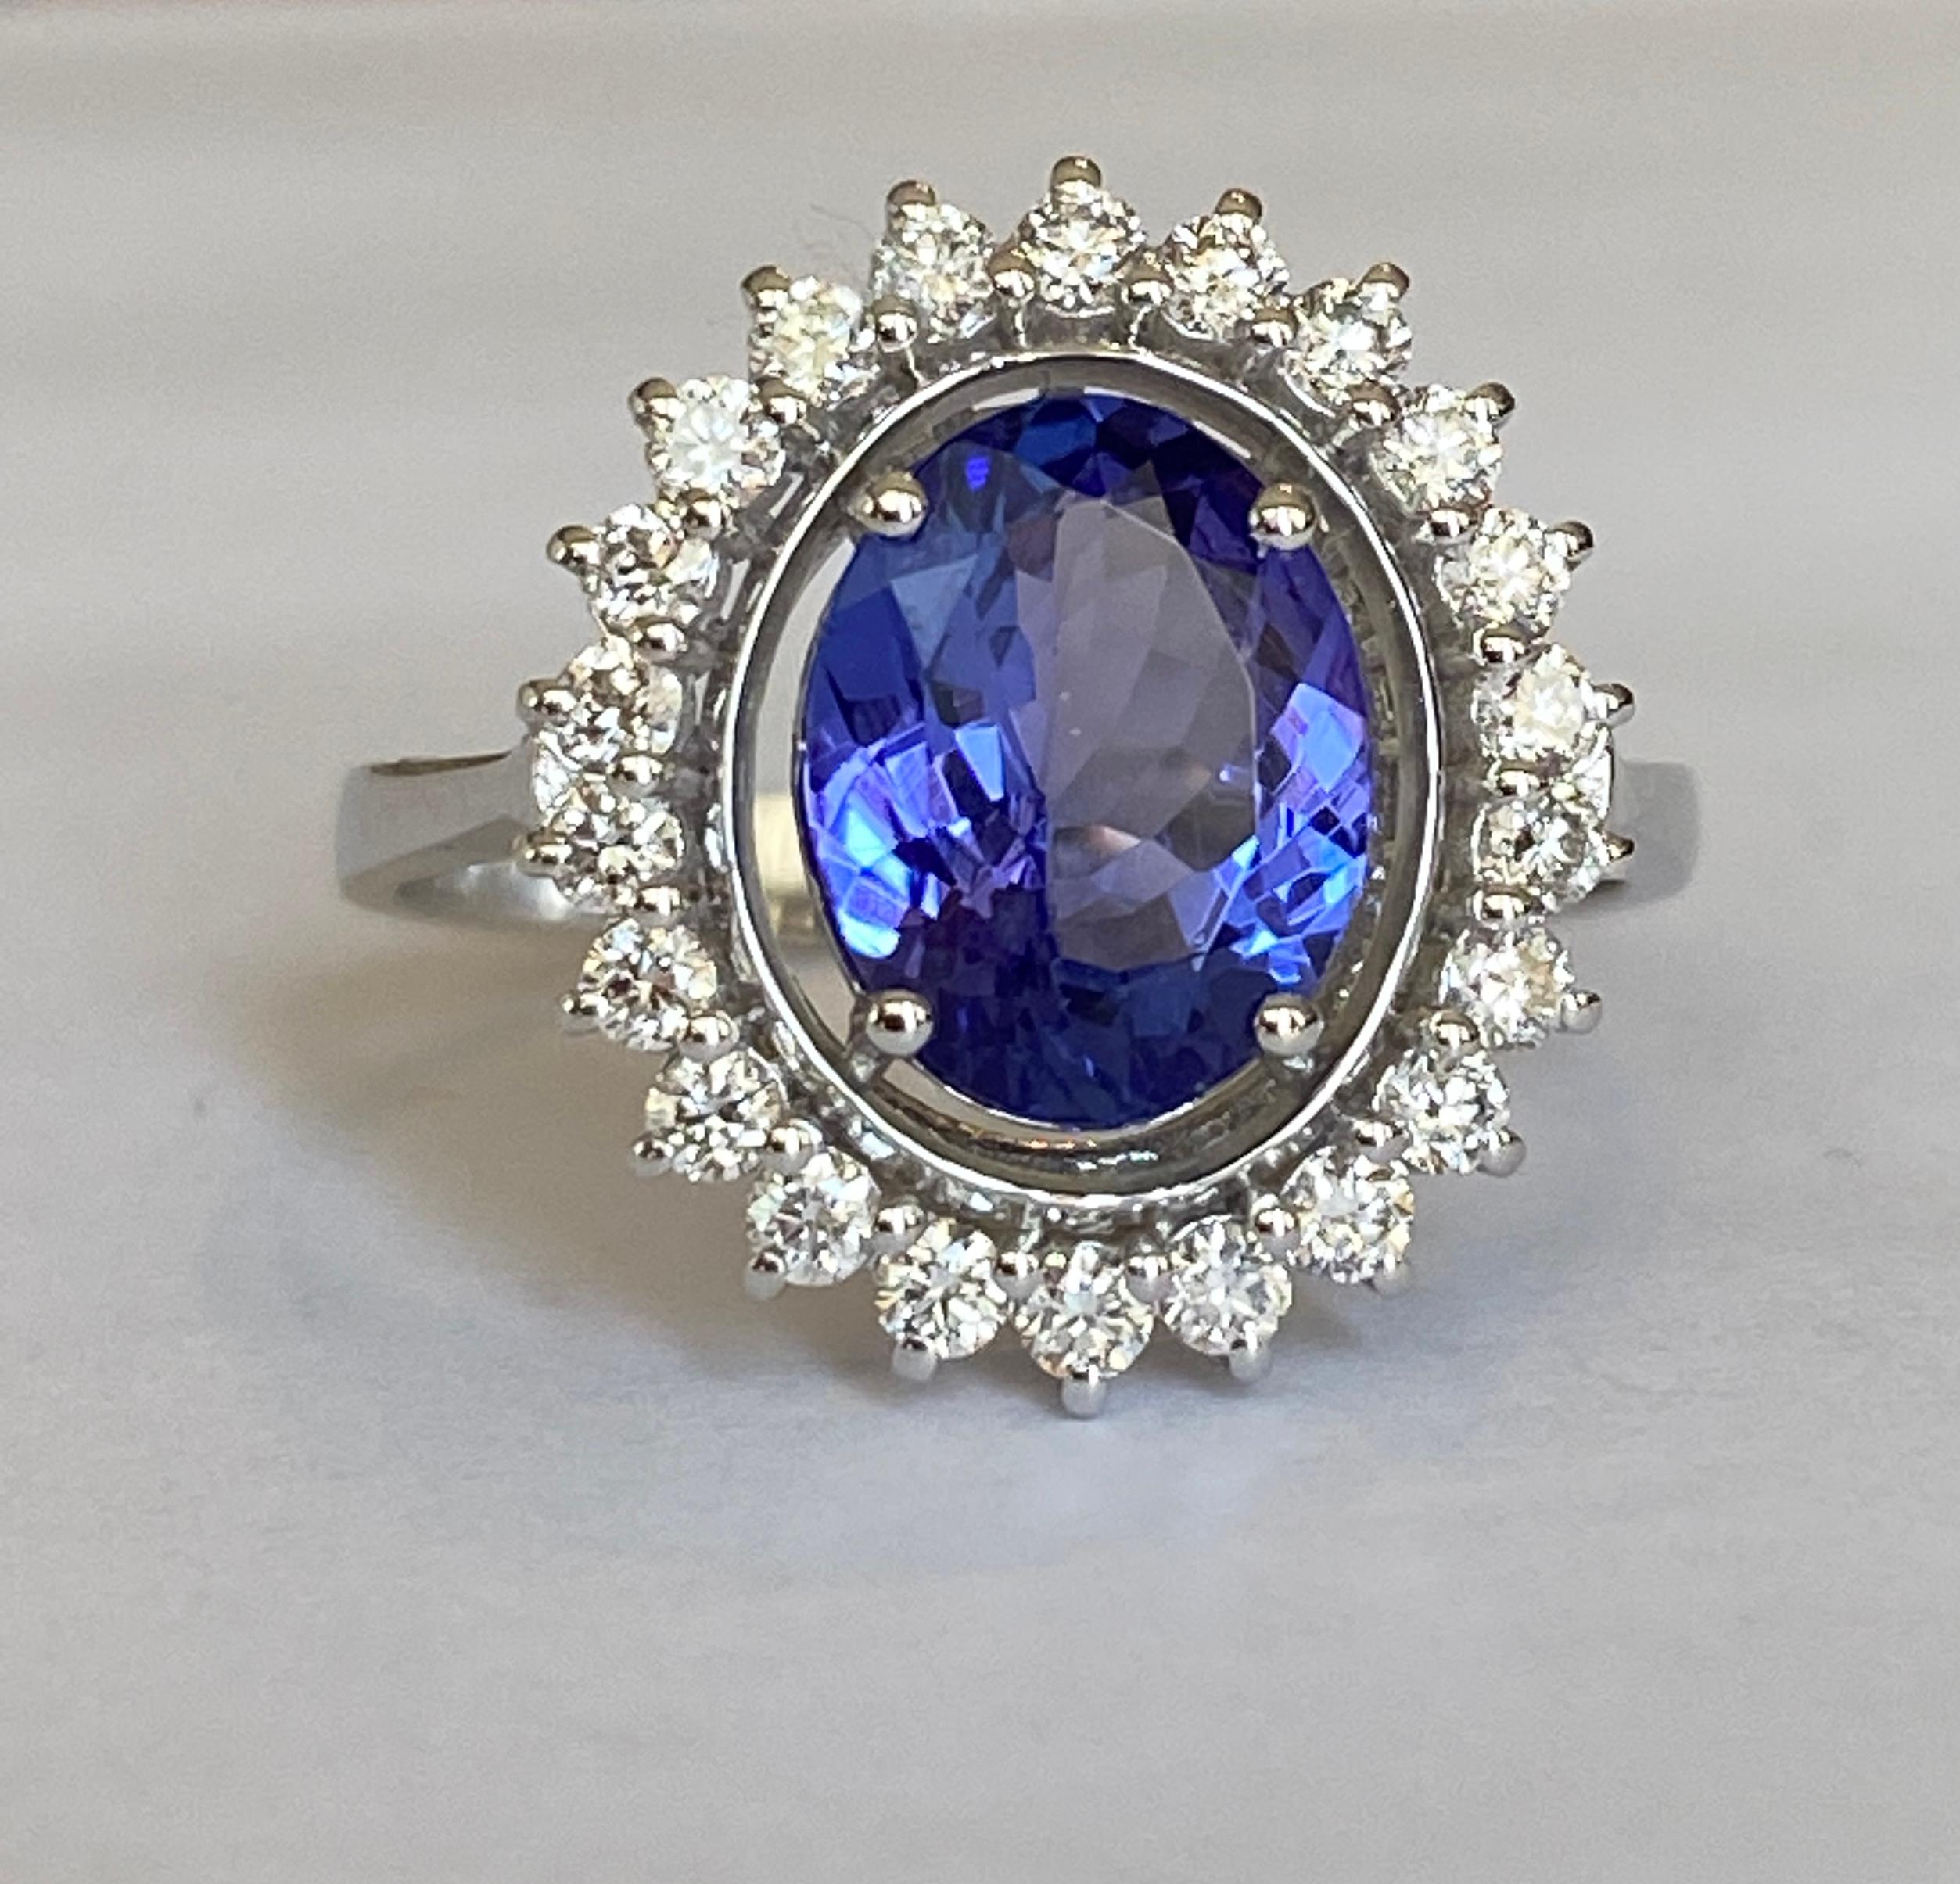 Offered in new  condition, Diana Cocktail ring in white gold, with an oval cut tanzanite of 2.00 ct. The stone is surrounded by an entourage of 22  pieces of brilliant cut diamonds, approx. 0.50 ct in total, of quality G/VS/SI. Own certificate is